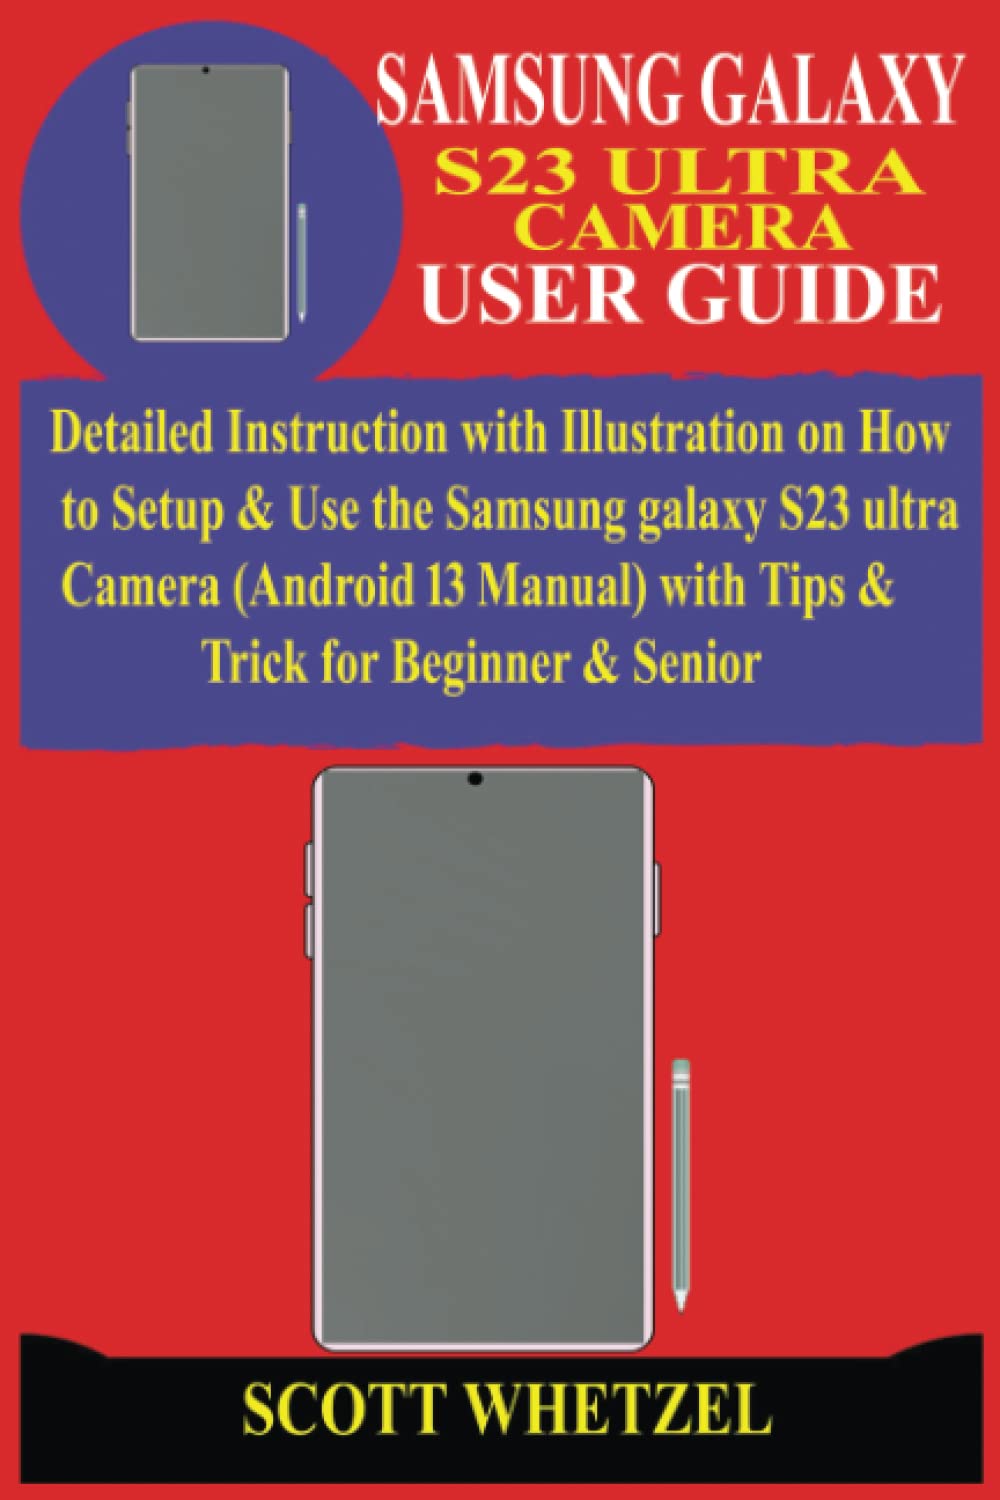 SAMSUNG GALAXY S23 ULTRA CAMERA USER GUIDE: Detailed Instruction with Illustration on How to Setup & Use the Samsung galaxy S23 ultra Camera (Android 13 Manual) with Tips & Trick for Beginner & Senior